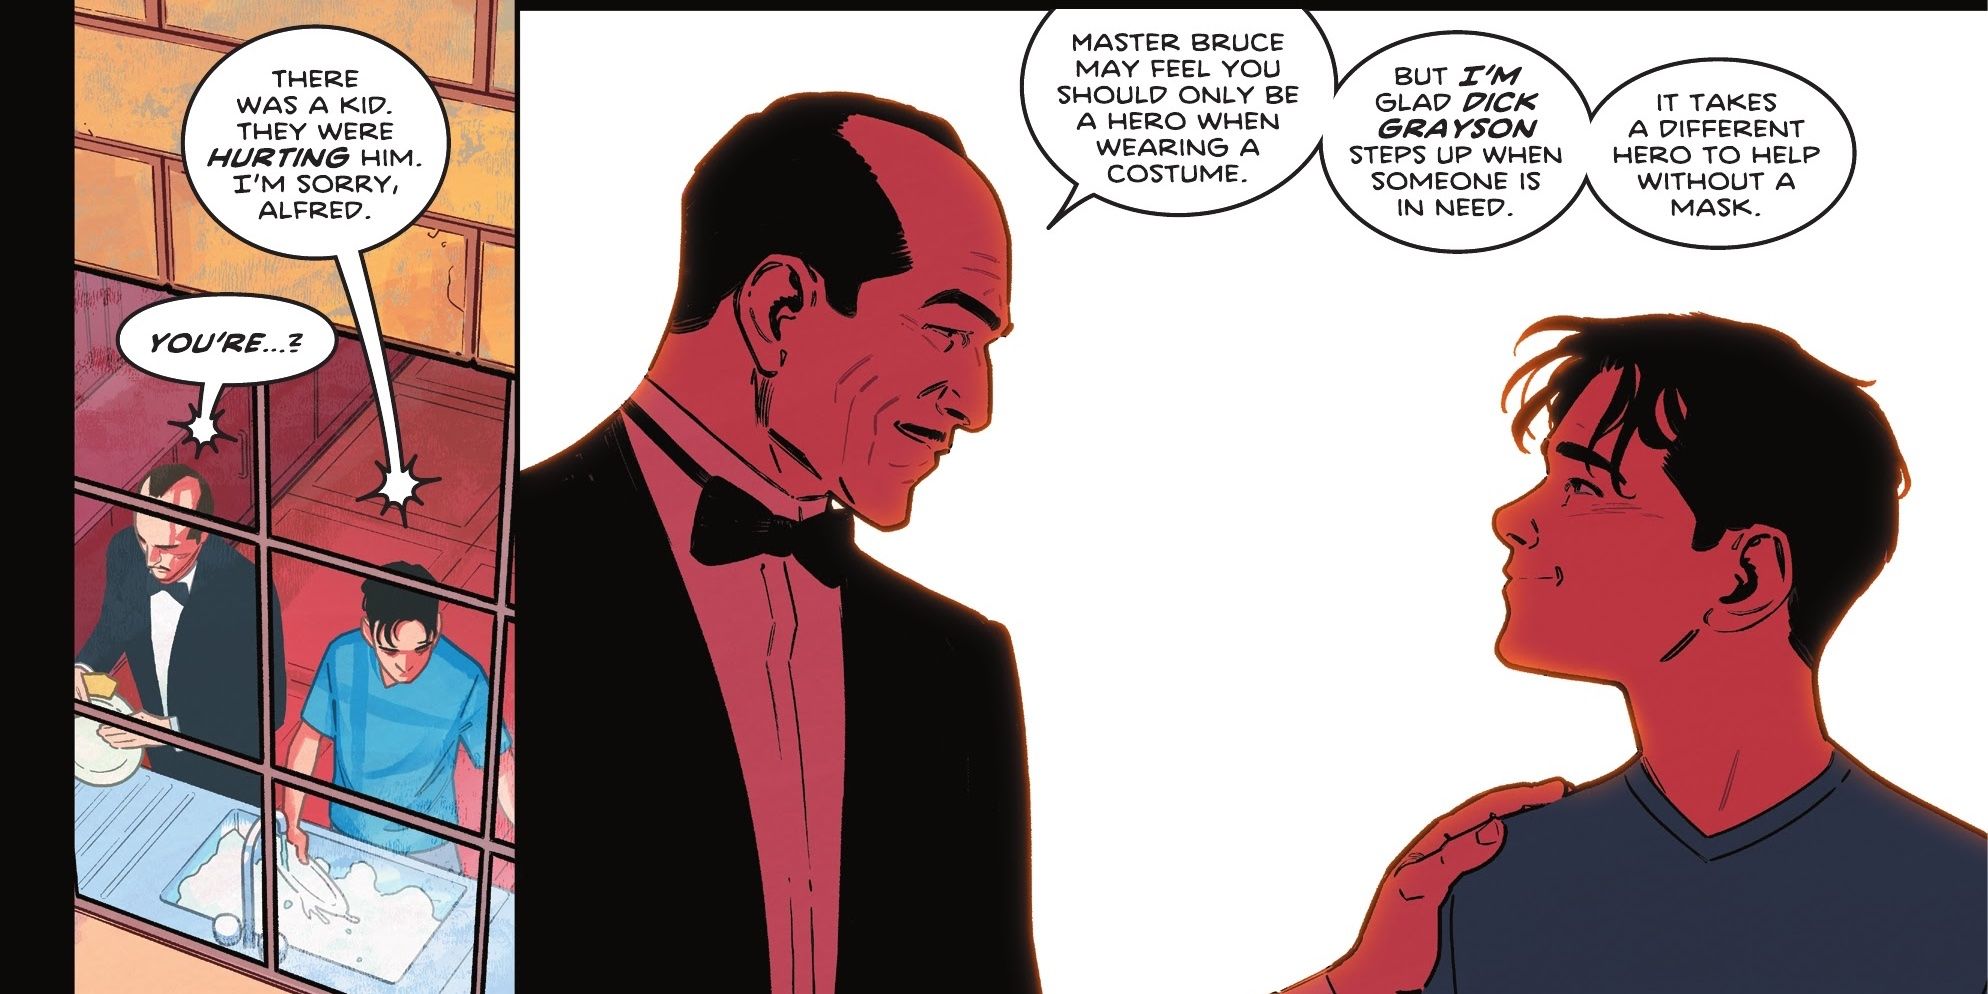 Alfred offers words of encouragement to Dick Grayson.